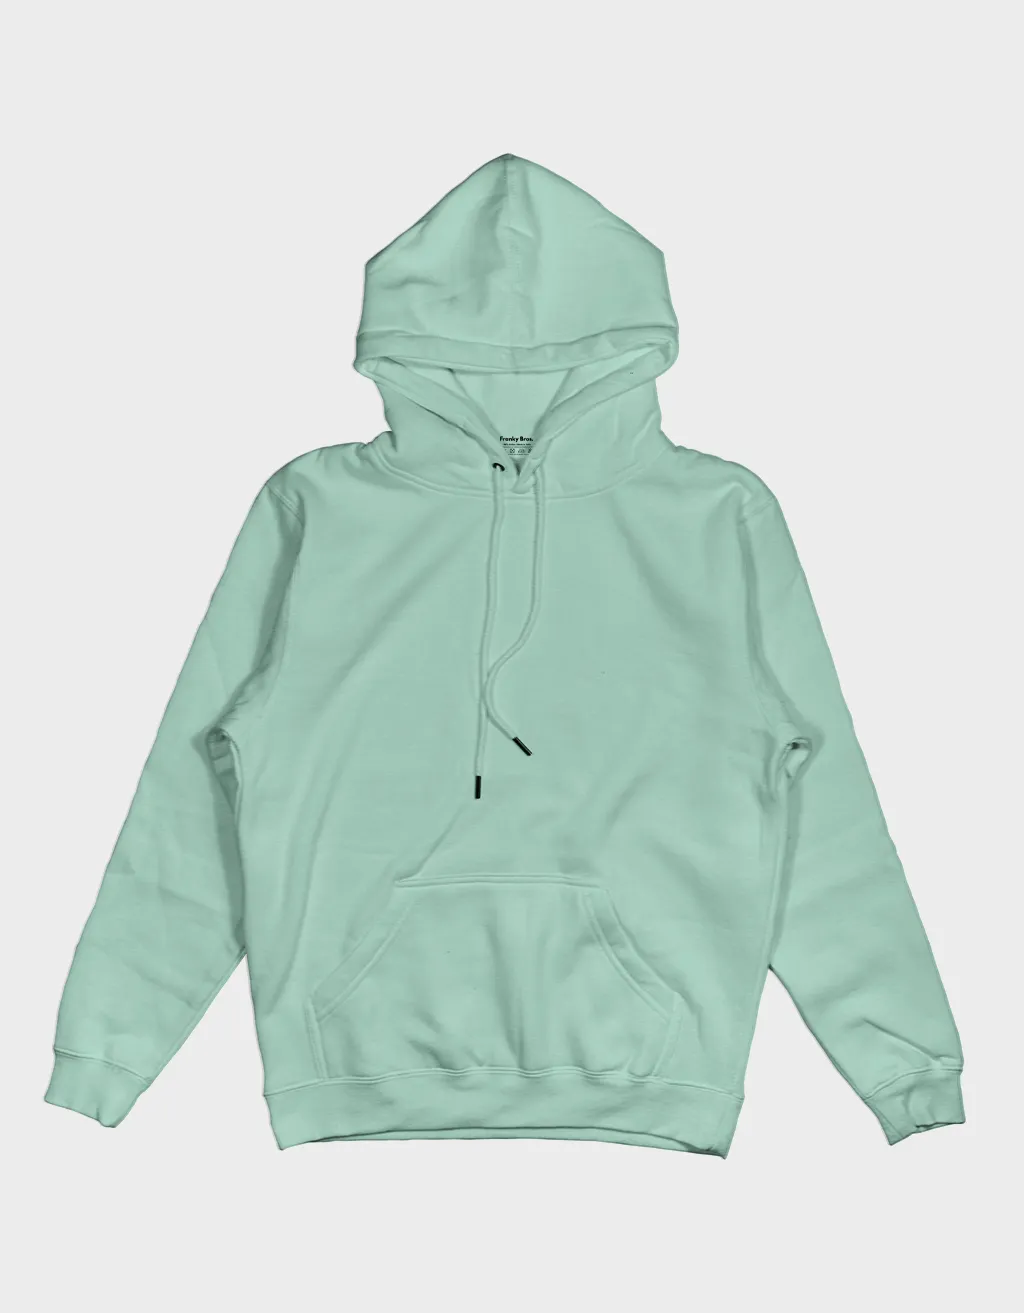 kids winter mint green hoodies for boys and girls india online